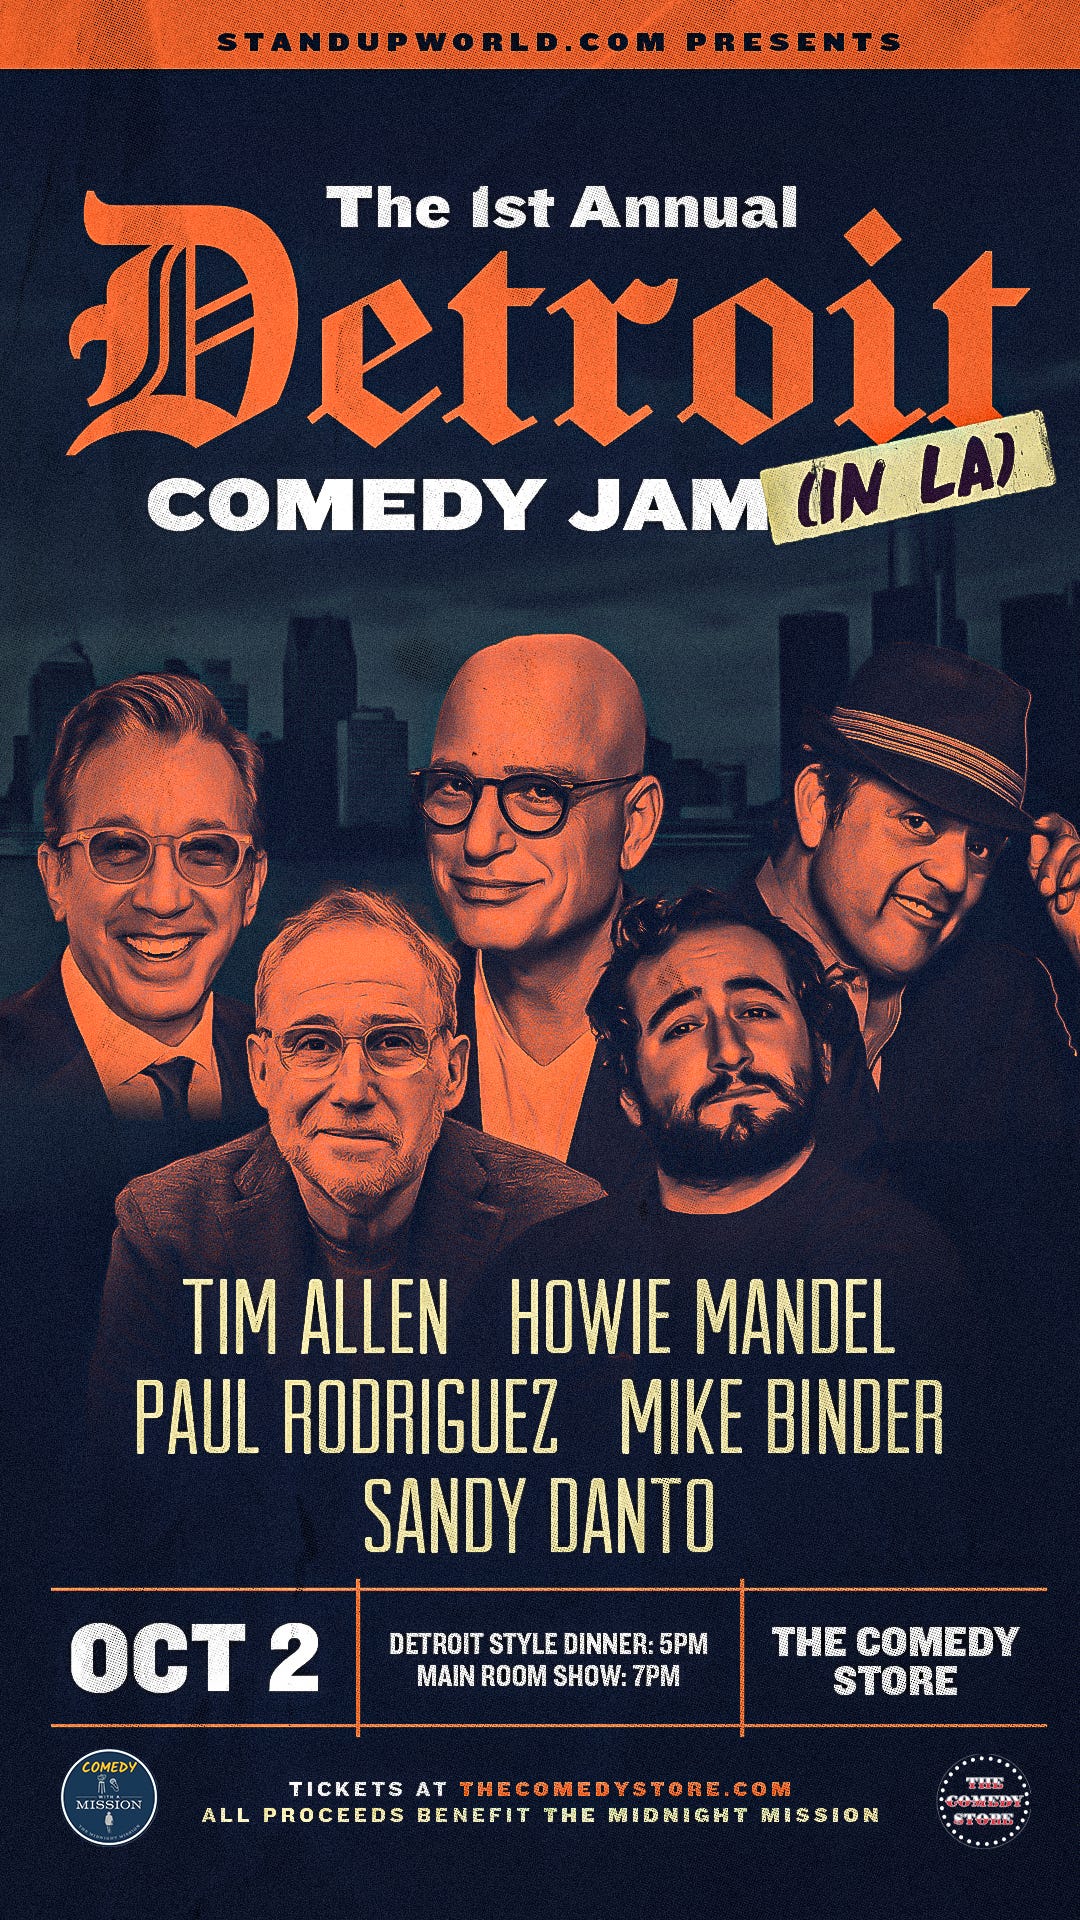 The Detroit Comedy Jam (In LA) Sun. Oct 2, dinner and show. 5pm The